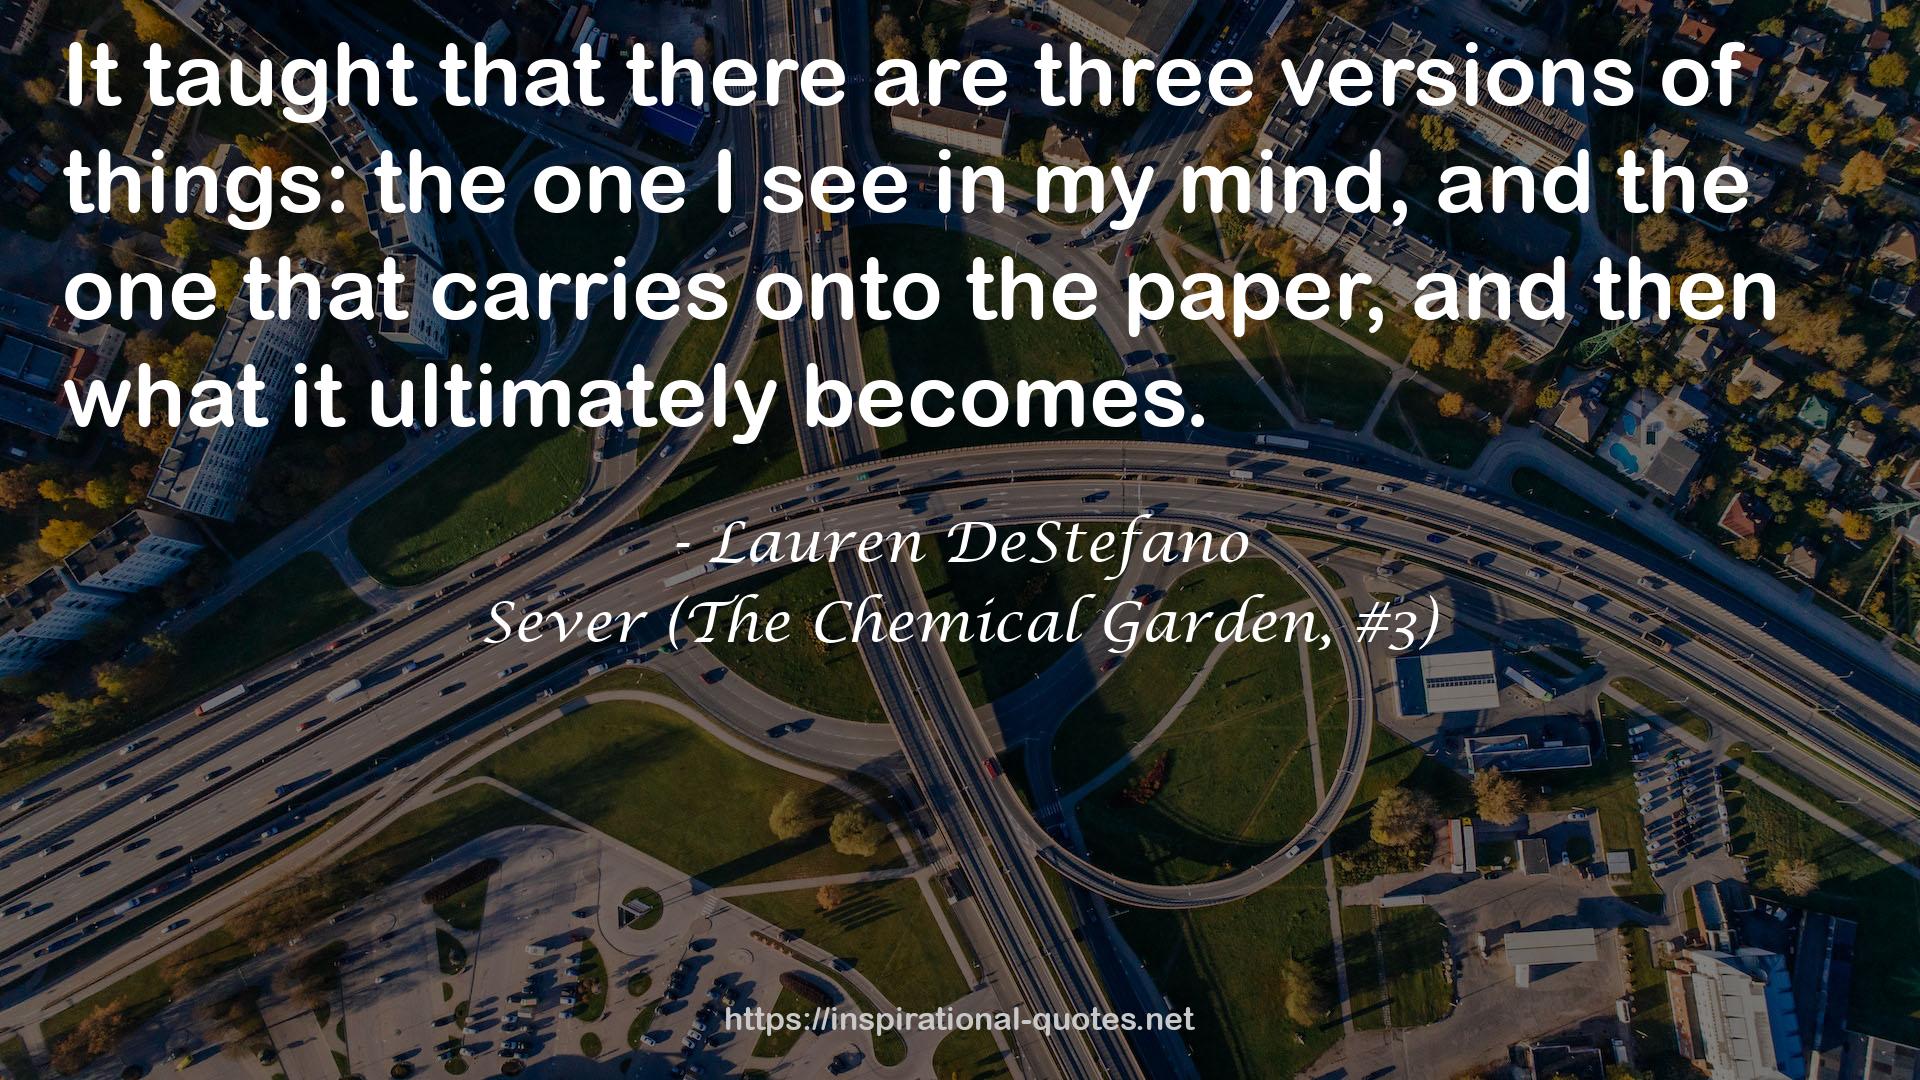 Sever (The Chemical Garden, #3) QUOTES